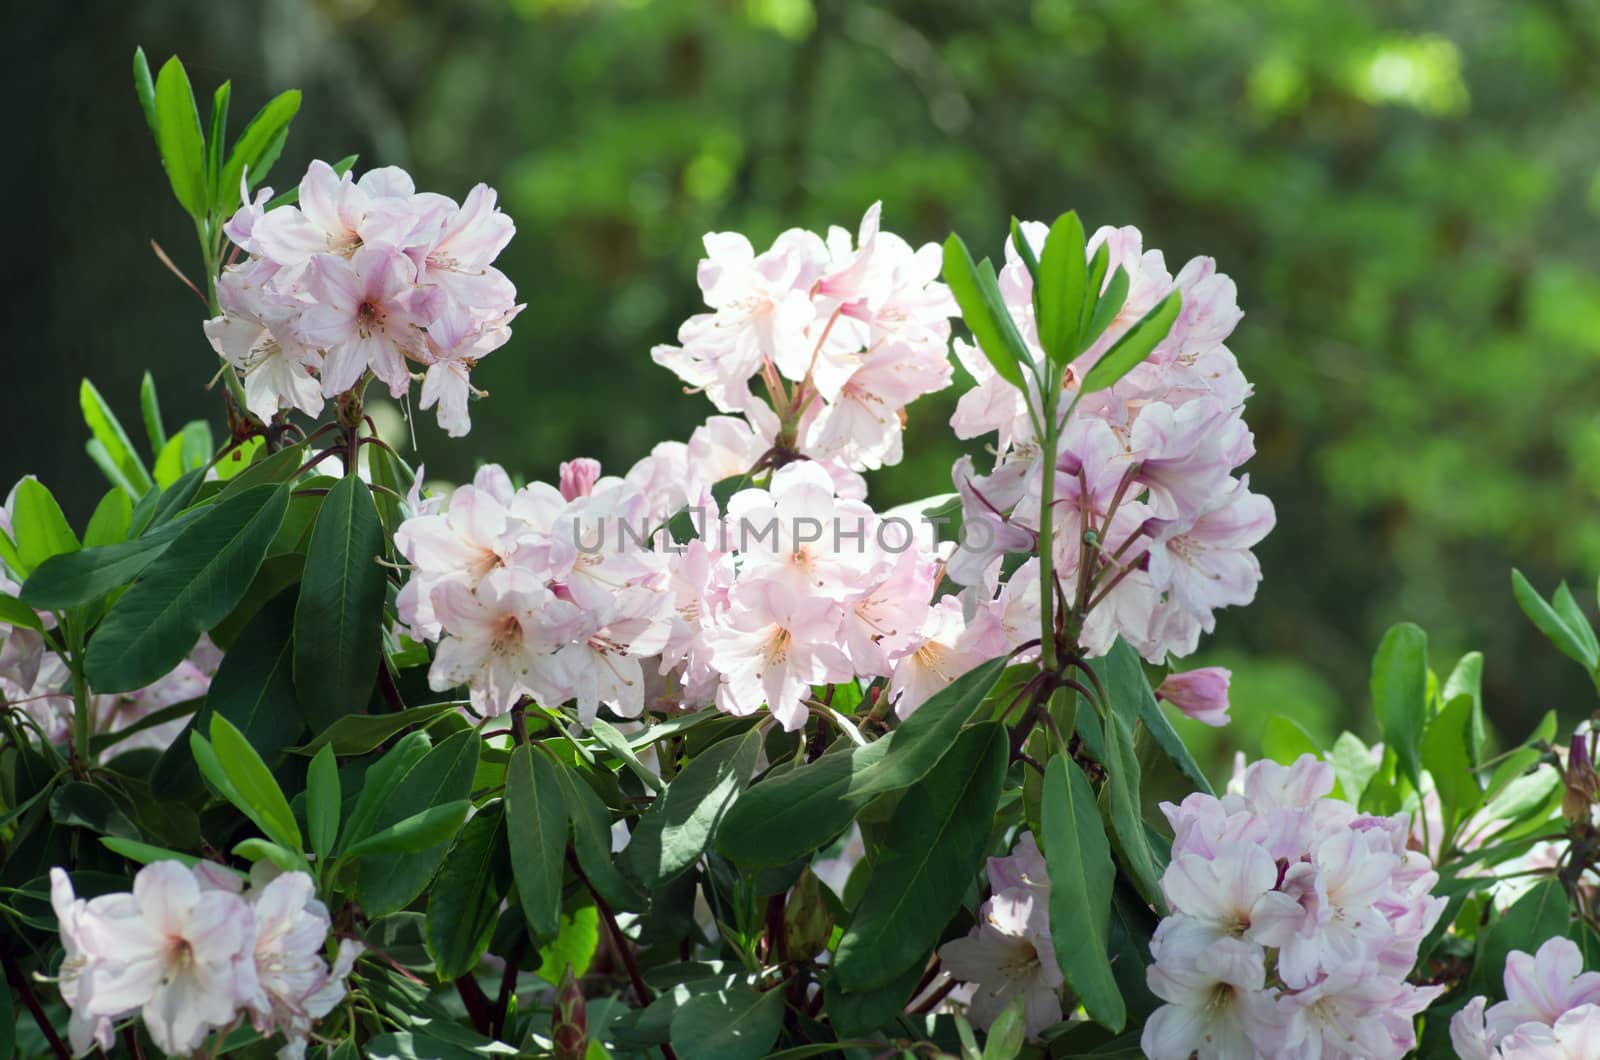 Pink flowers of a rhododendron close up